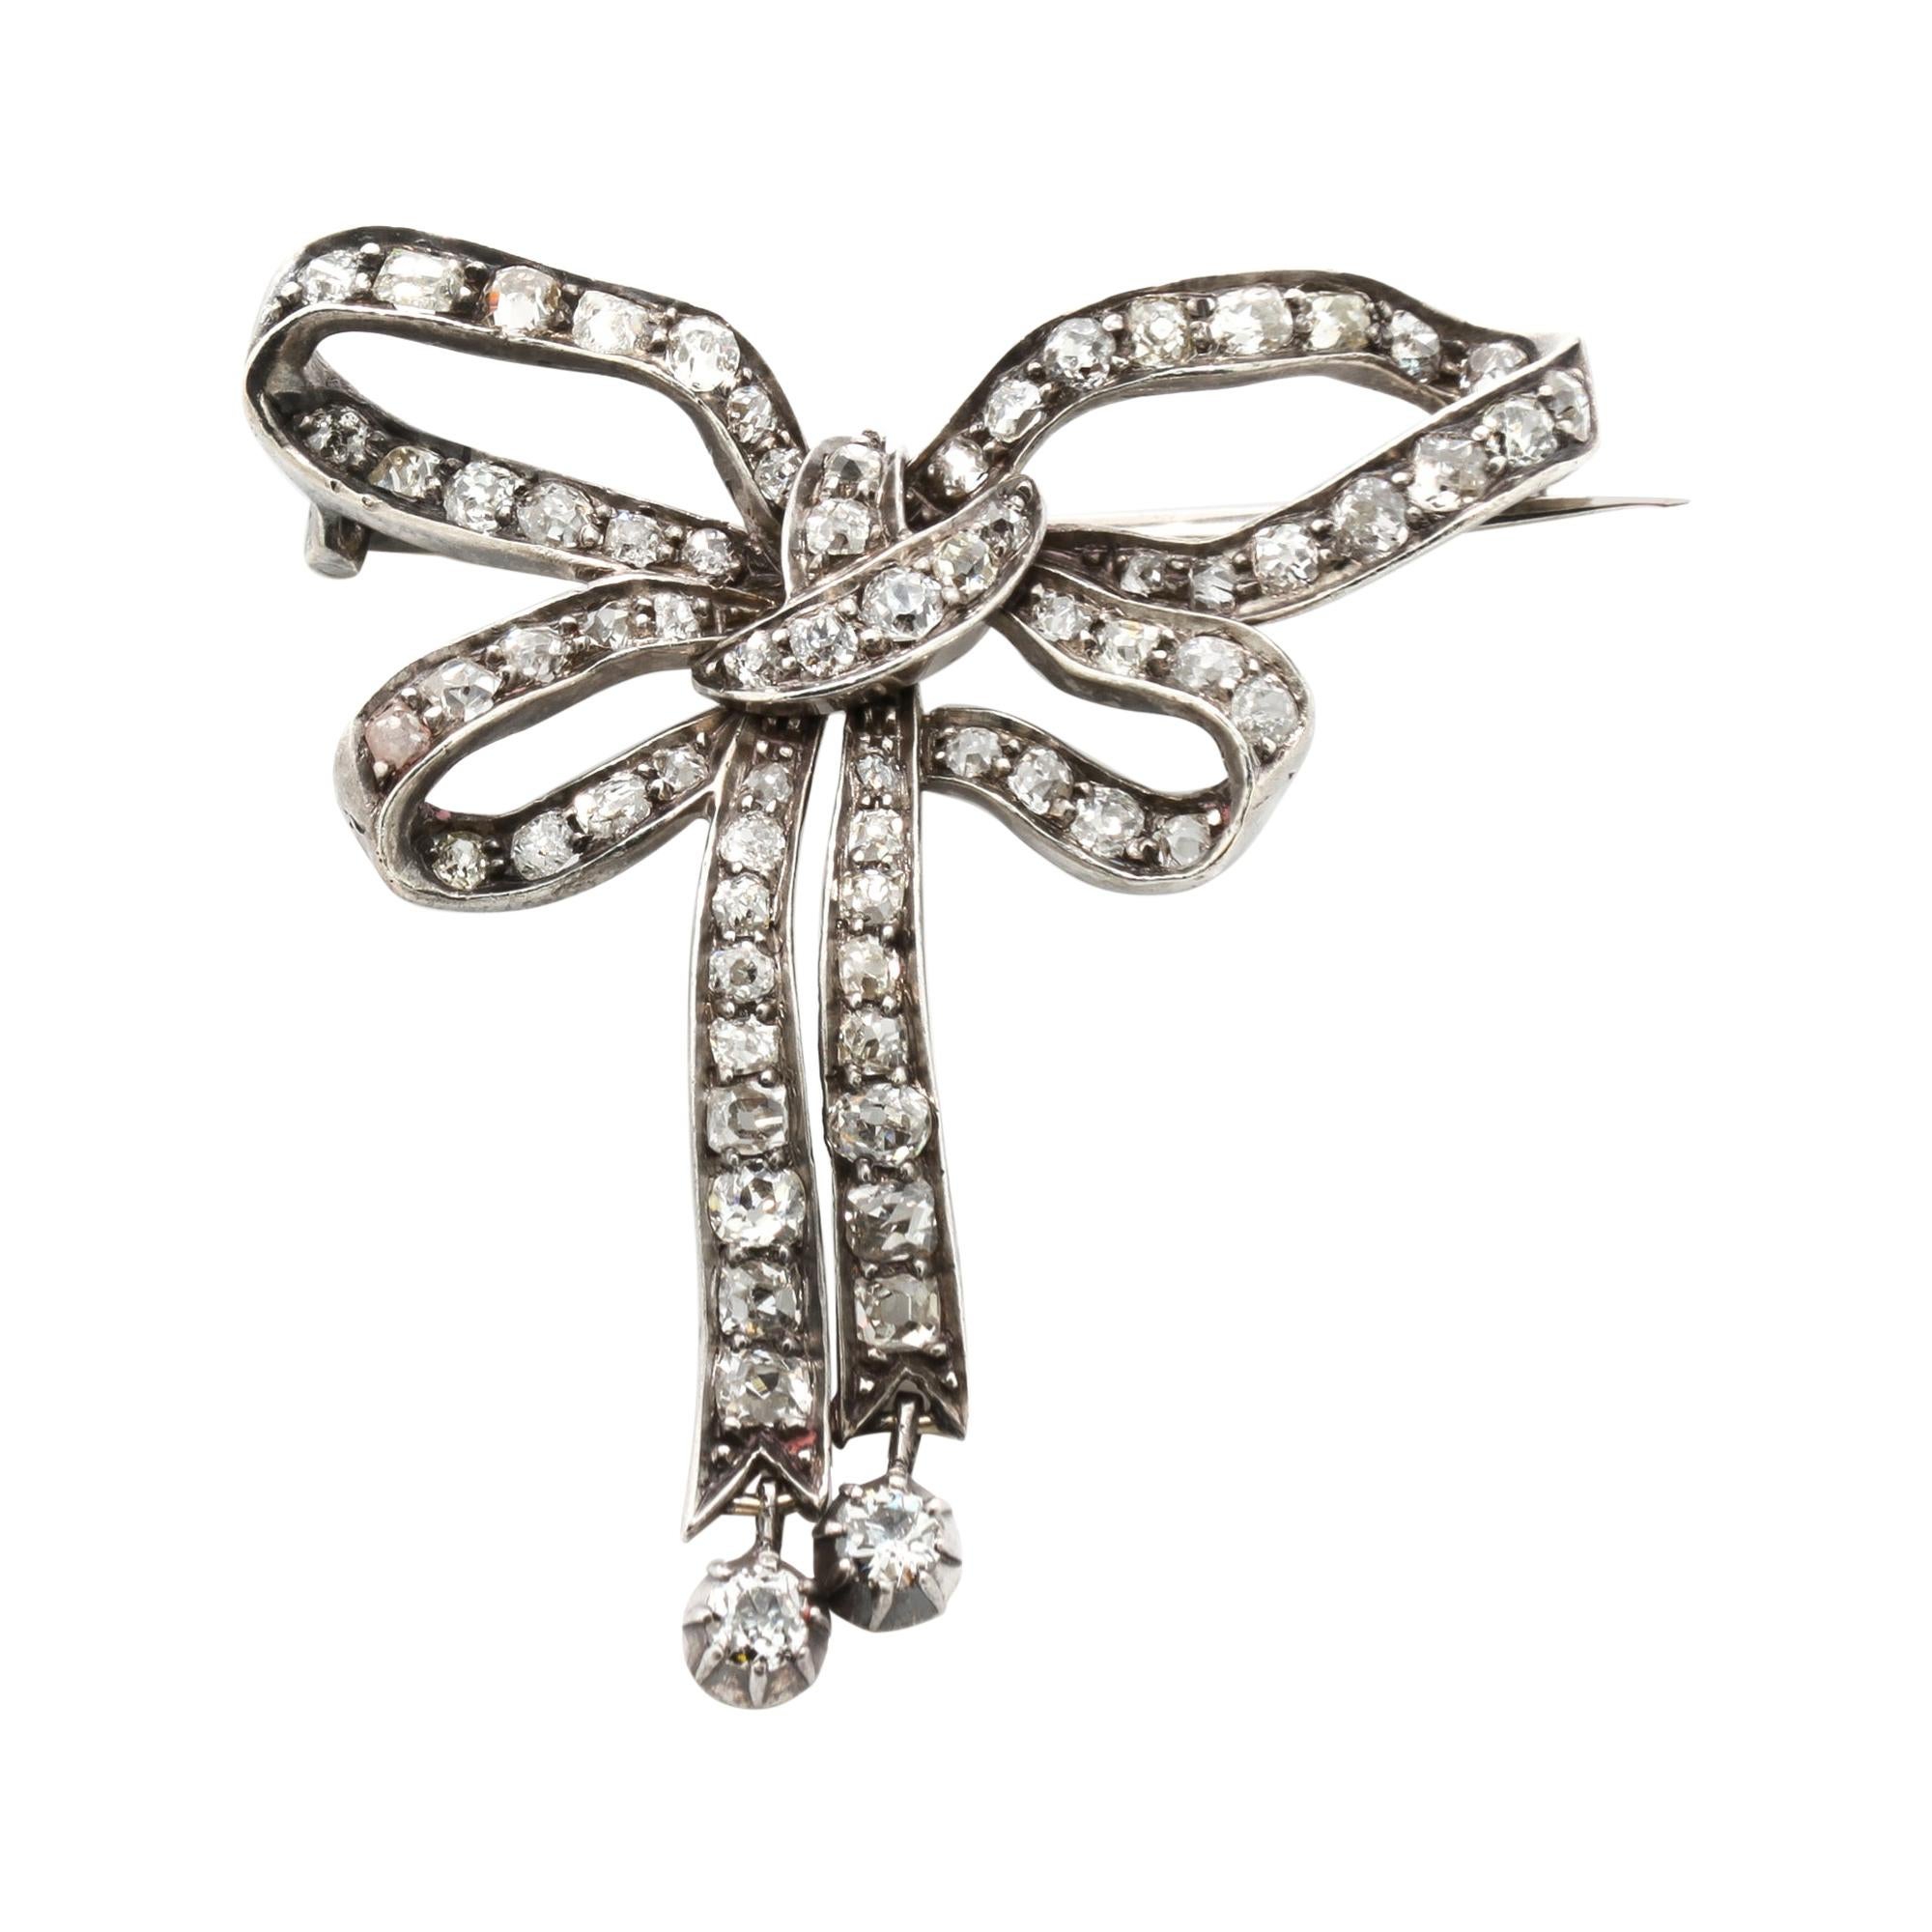 Antique Victorian Platinum Brooch in the Shape of a Bow Tie with Diamonds